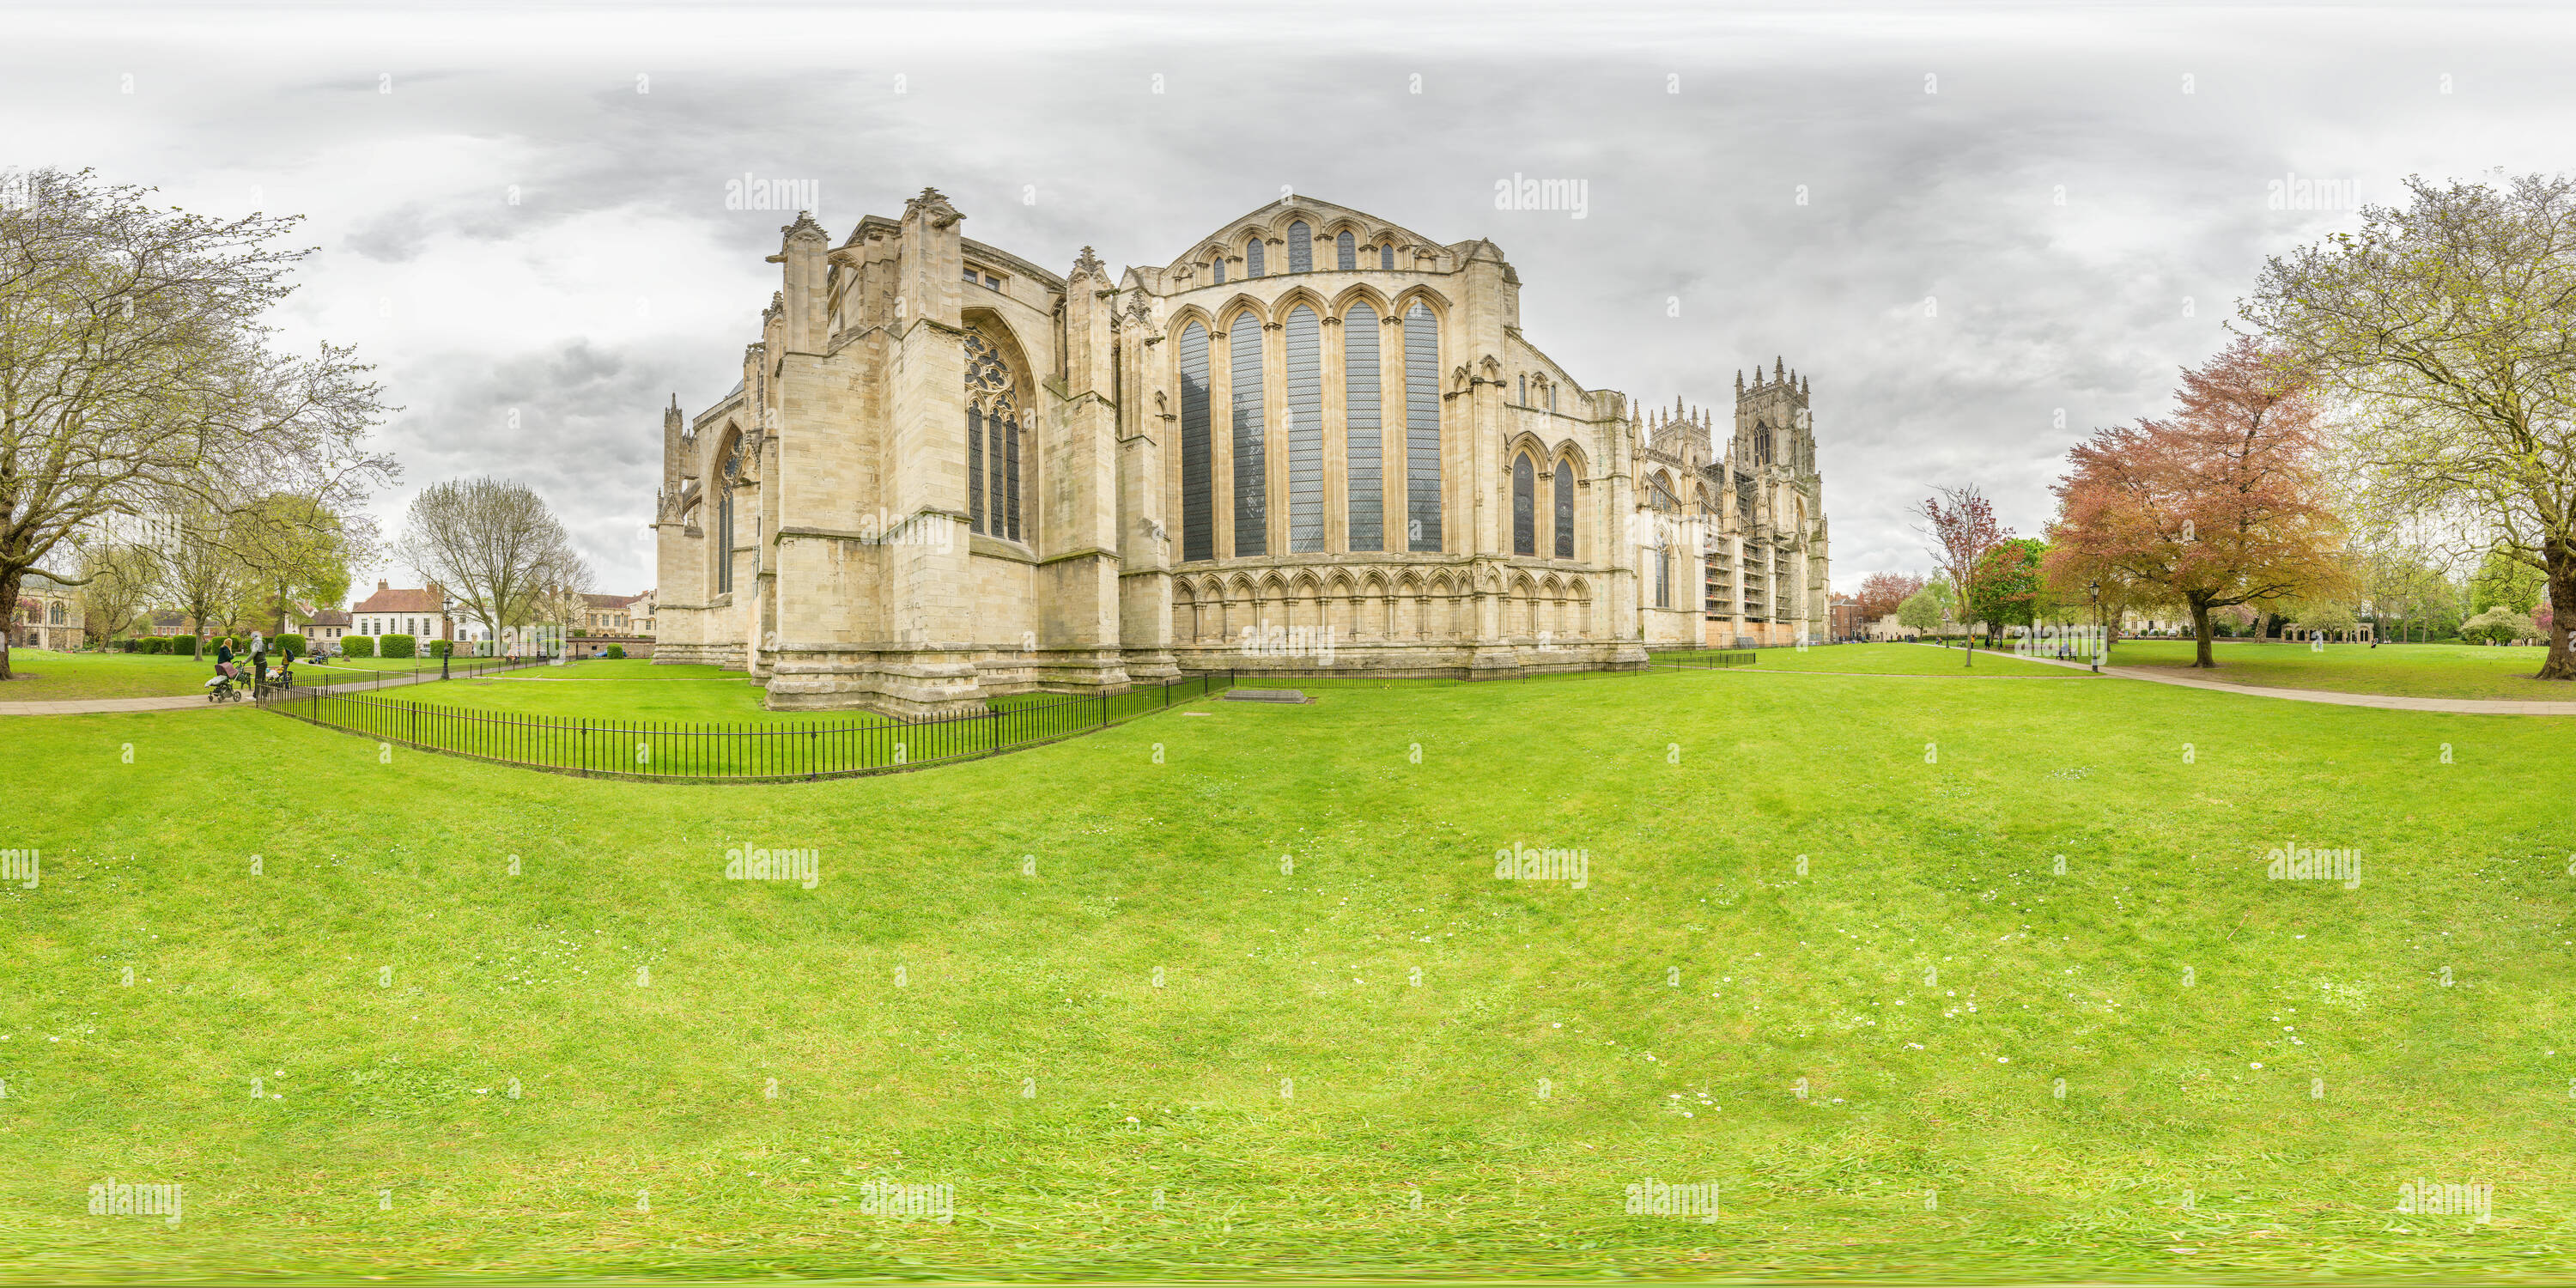 360 degree panoramic view of Dean's park and the north transept window of the medieval cathedral (minster) at York, England, on an overcast spring day.